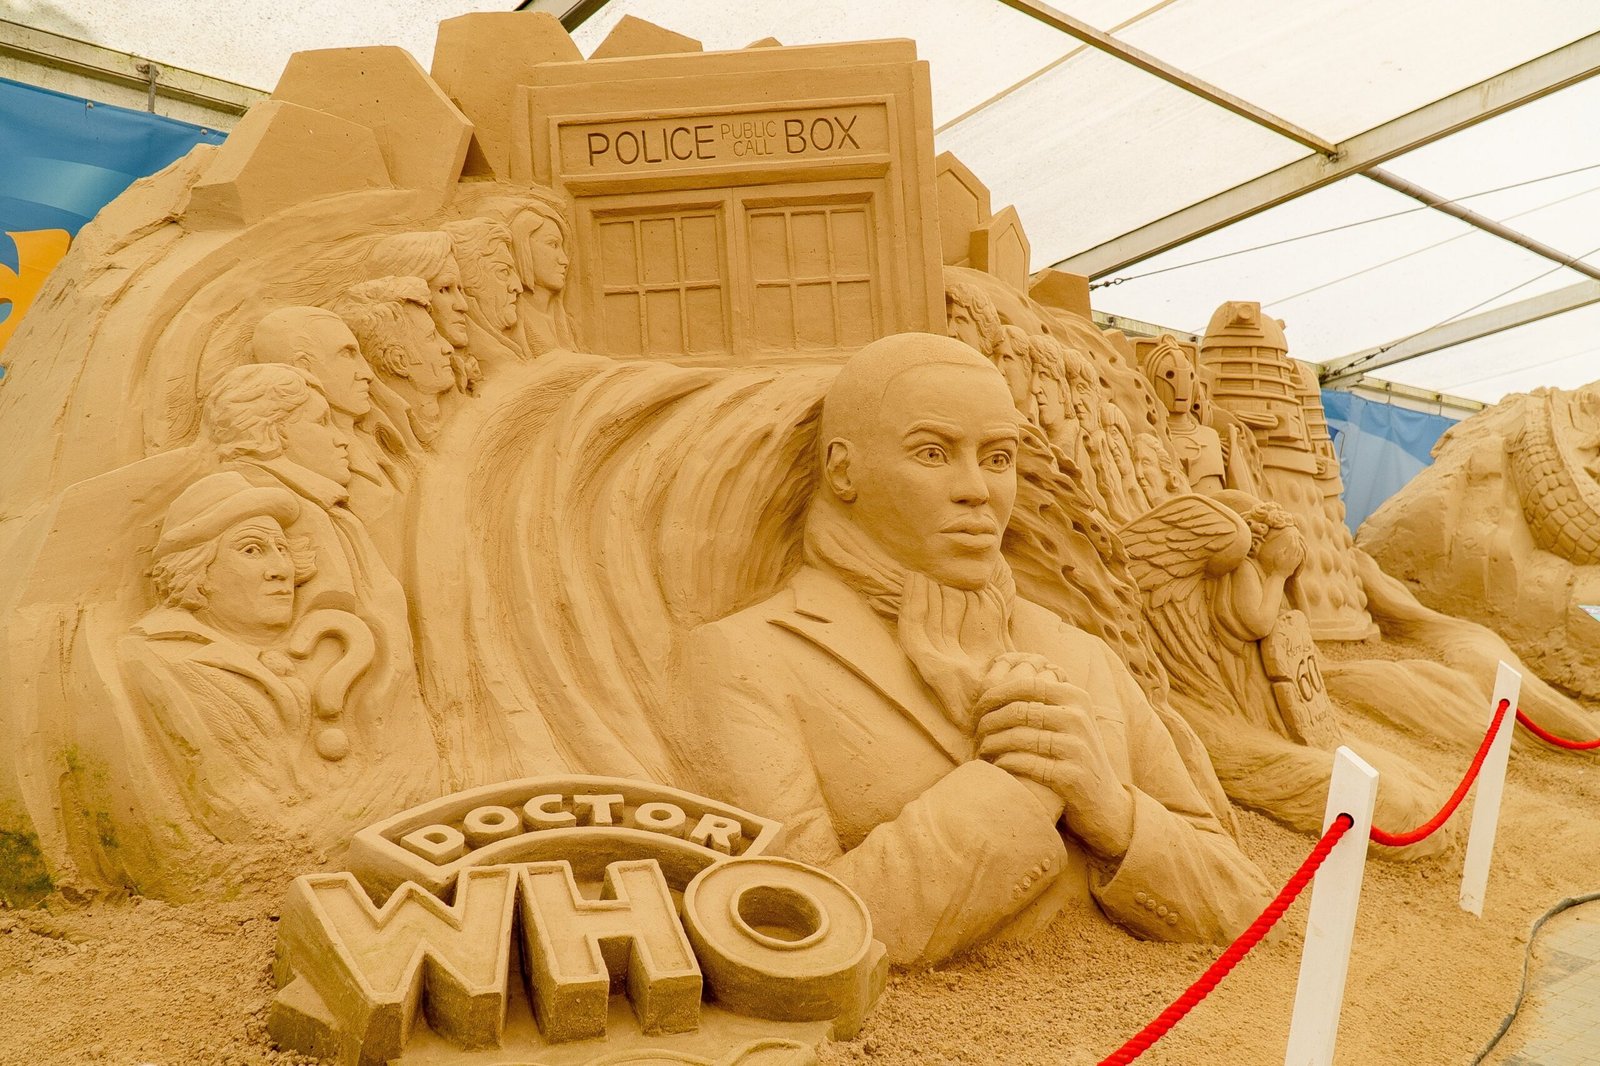 Check Out This Cool Doctor Who Sand Sculpture Featuring Daleks, Cybermen, and all the Doctors!